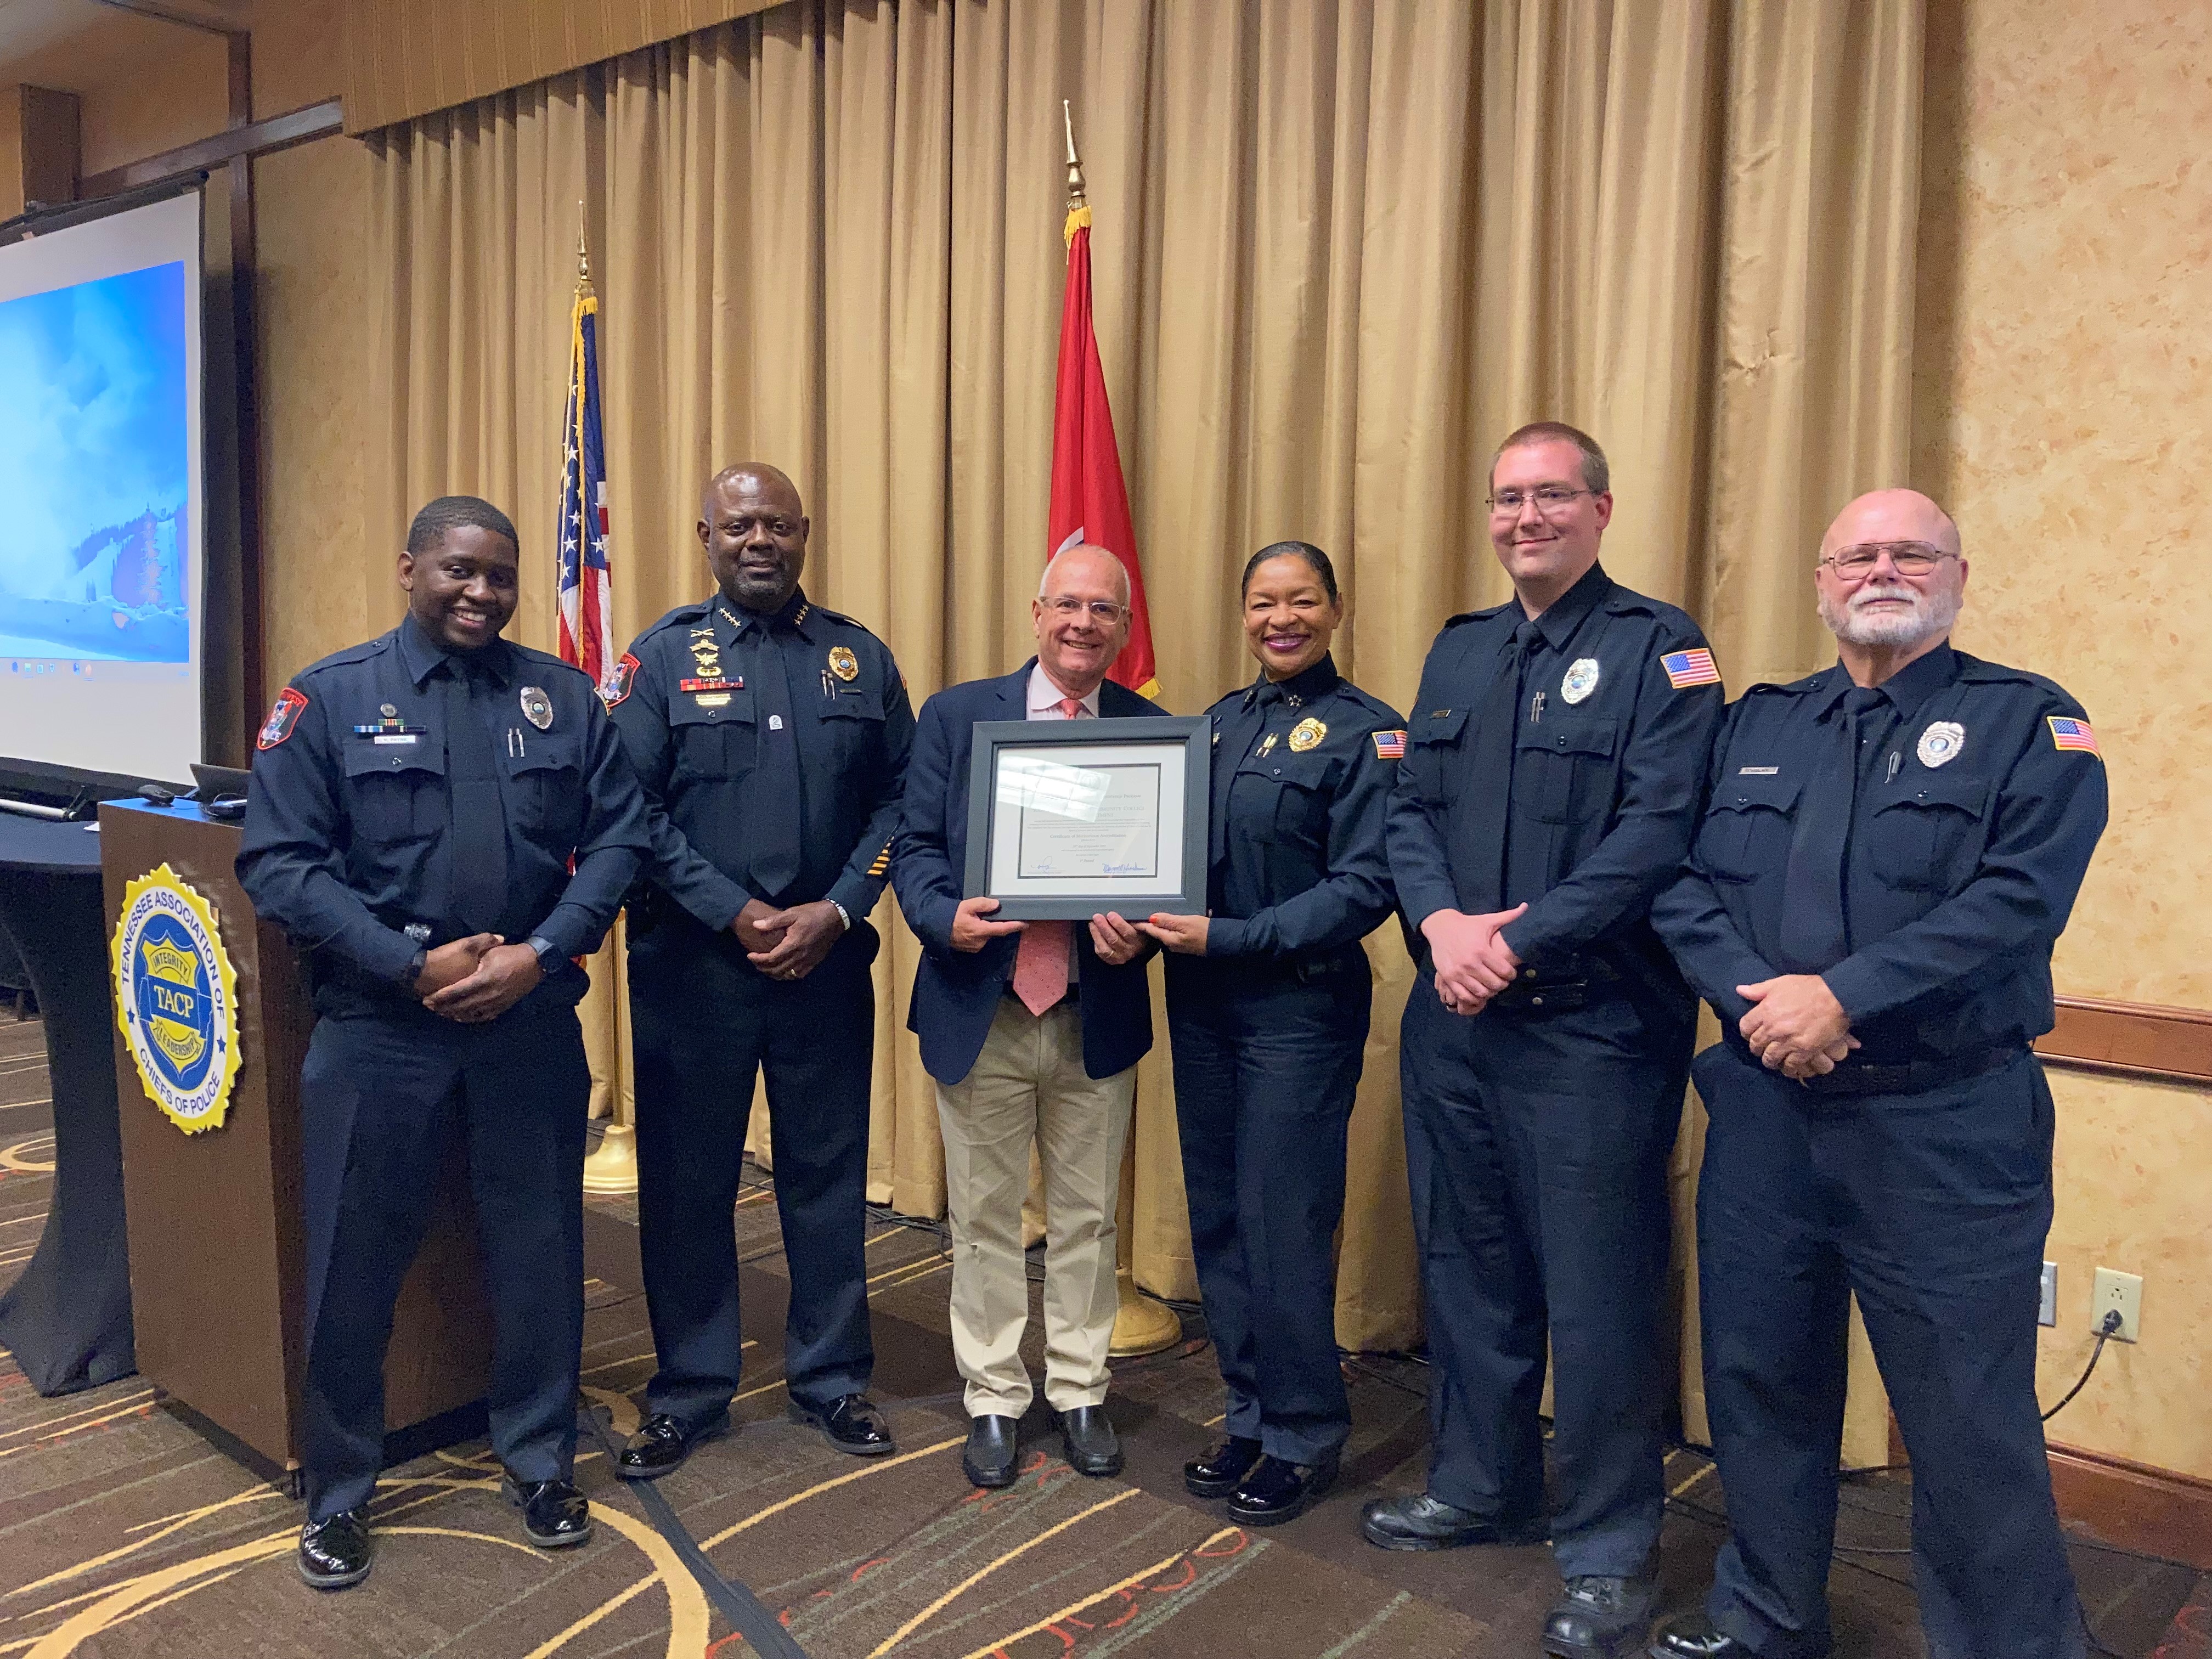 Southwest’s Public Safety and Police Services Director L. Angela Webb receives the department’s accreditation certificate from TACP President Mark Yother. Surrounding them are Southwest Officer Nigel Payne, Assistant Director Ernest Greenleaf and Officers Jon Burleson and Don Drewry.